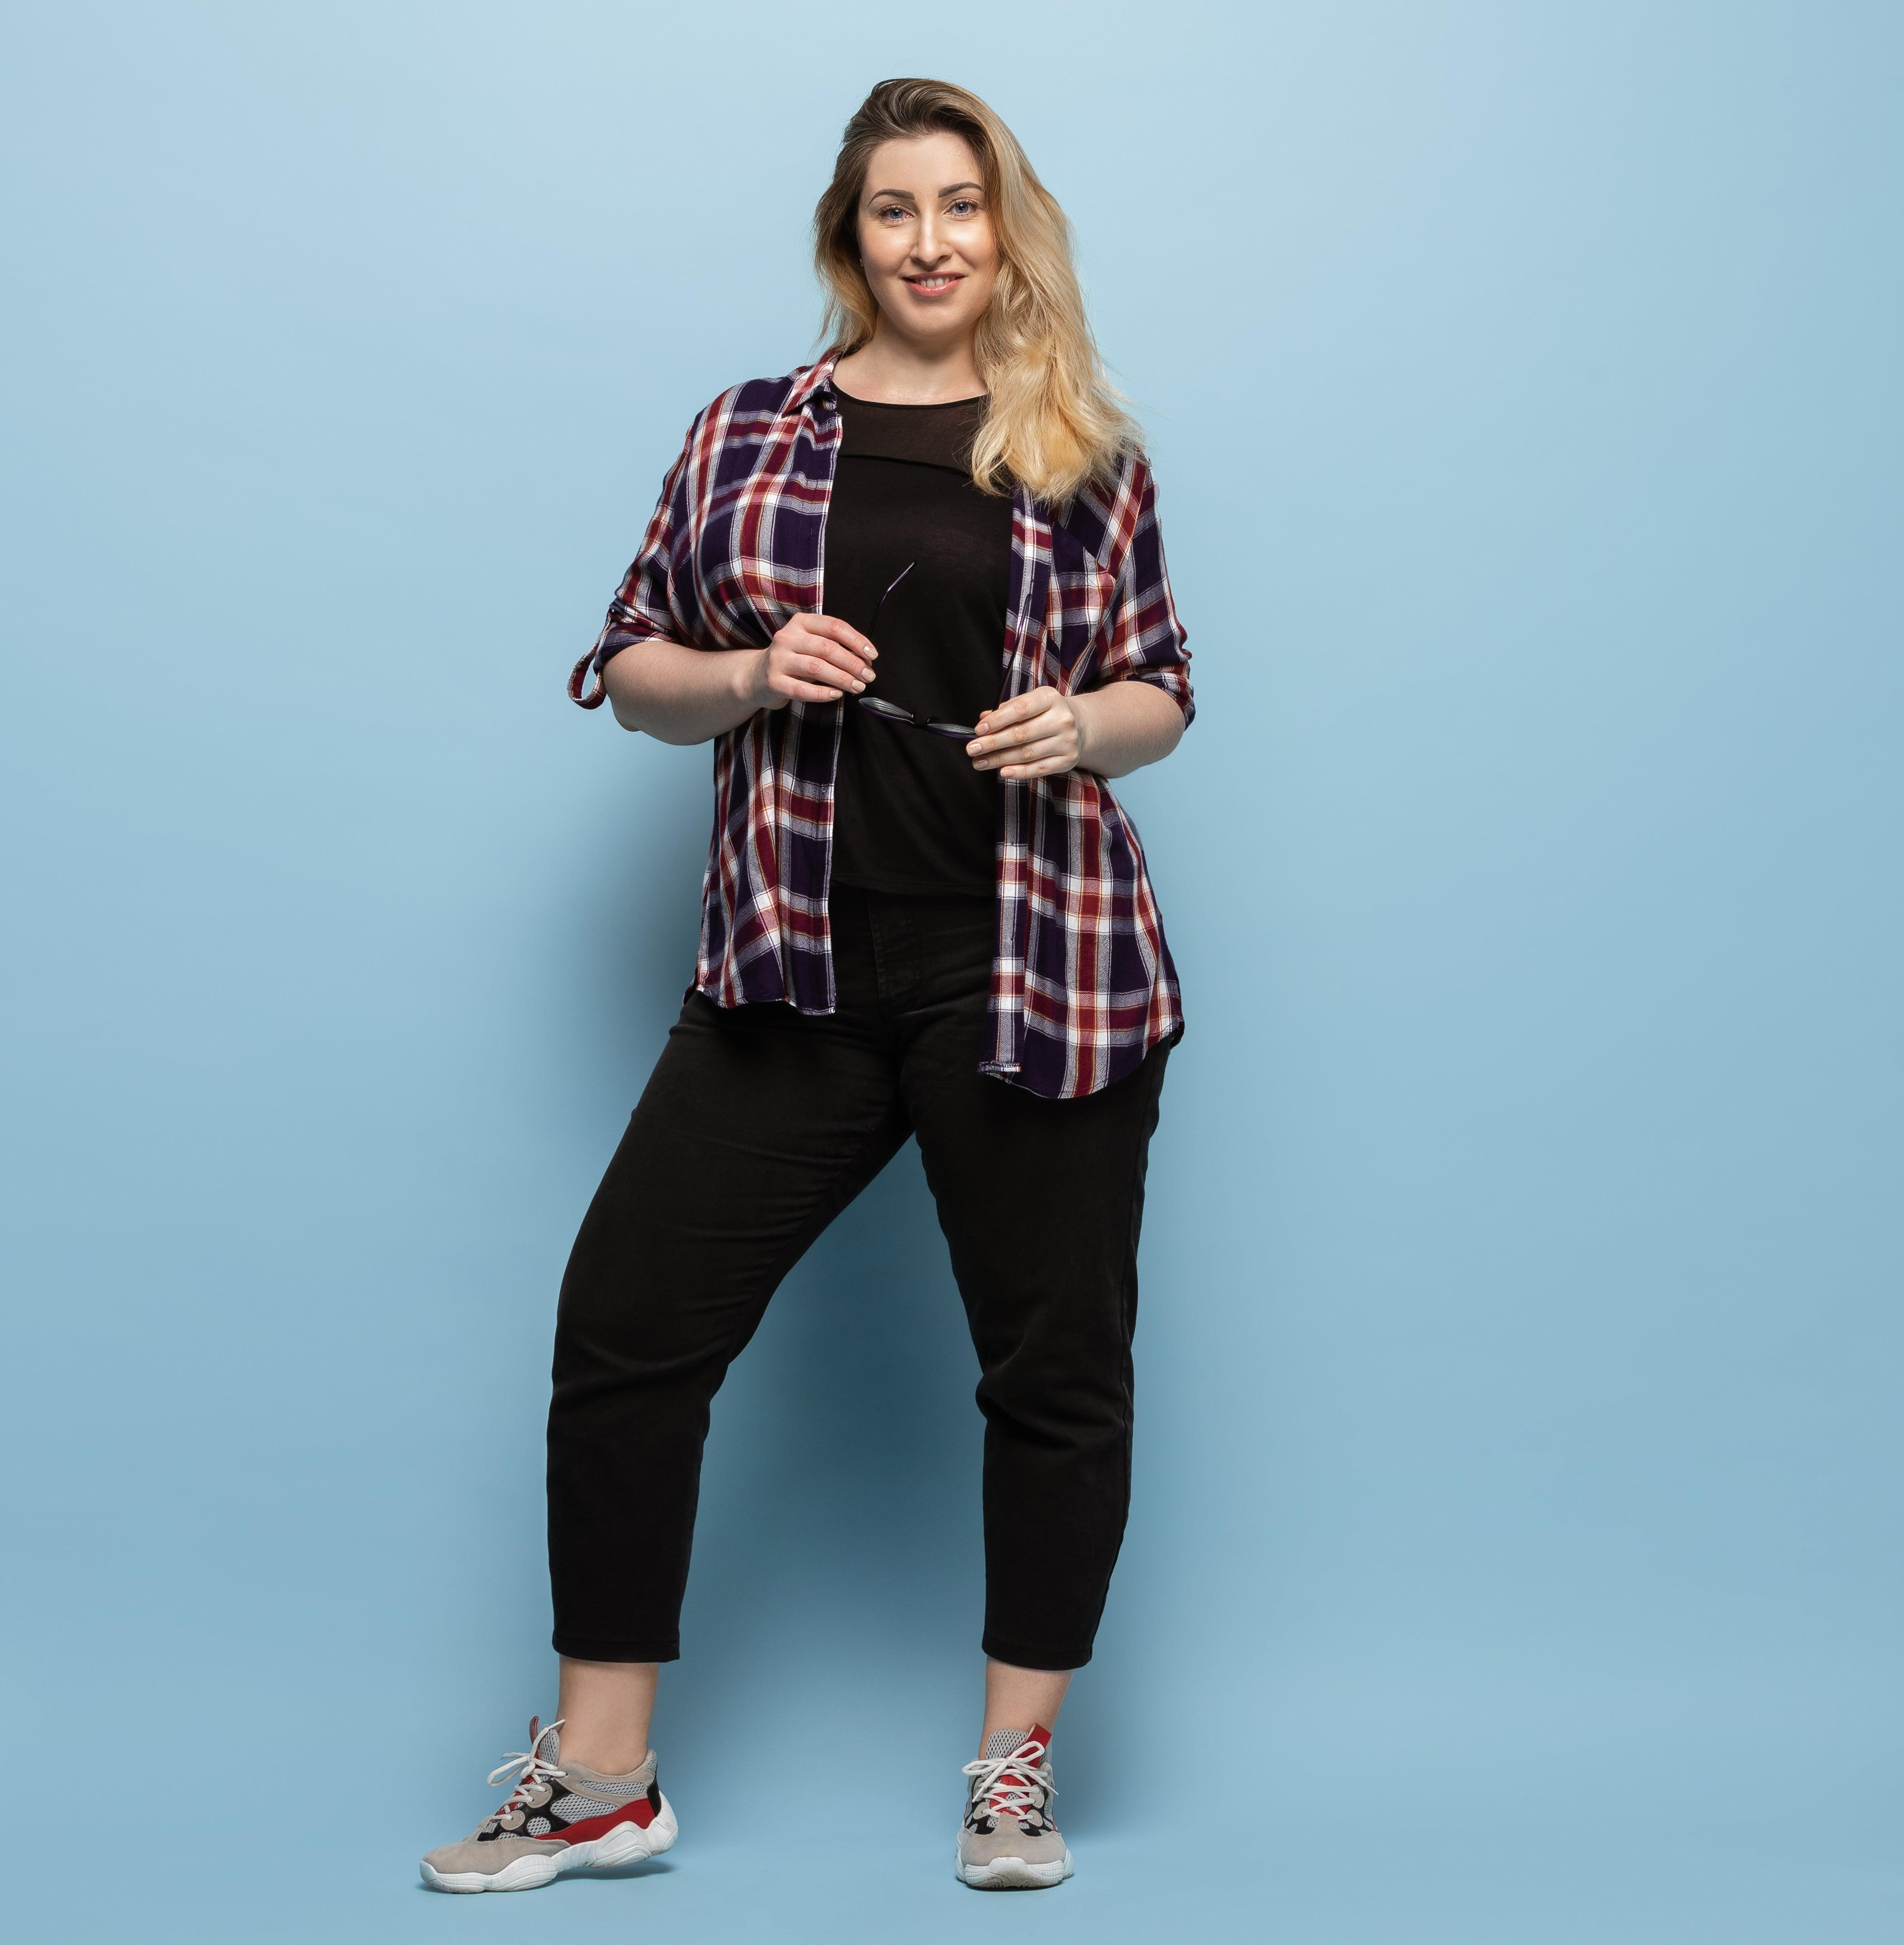 How to Style Denim Jeans for Curvy Figures